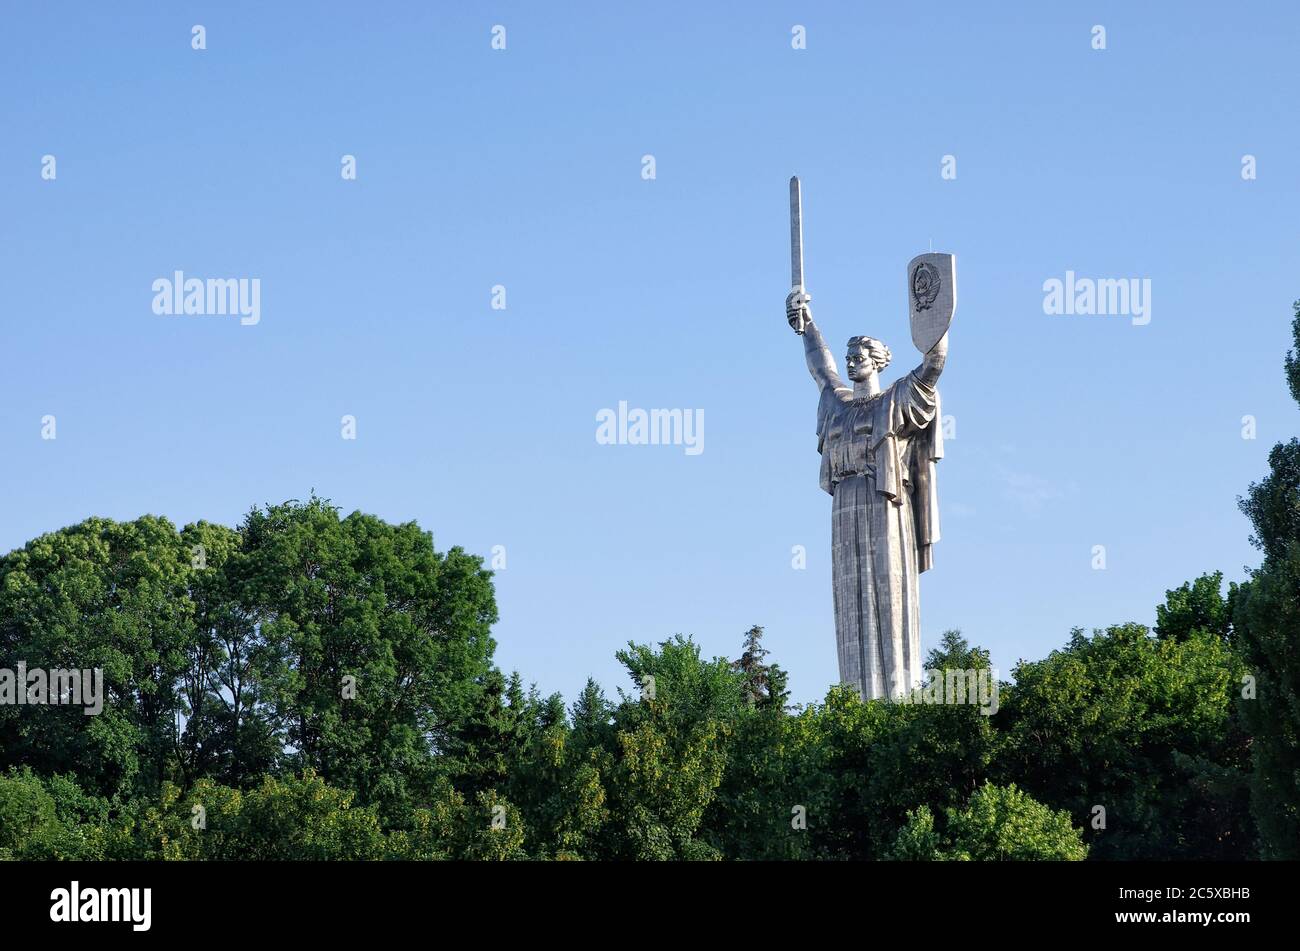 KYIV, UKRAINE - JUNE 15: Frontal view of Mother Motherland monument in Kyiv at the Museum of the Great Patriotic War in Kyiv, Ukraine on June 15, 2013 Stock Photo